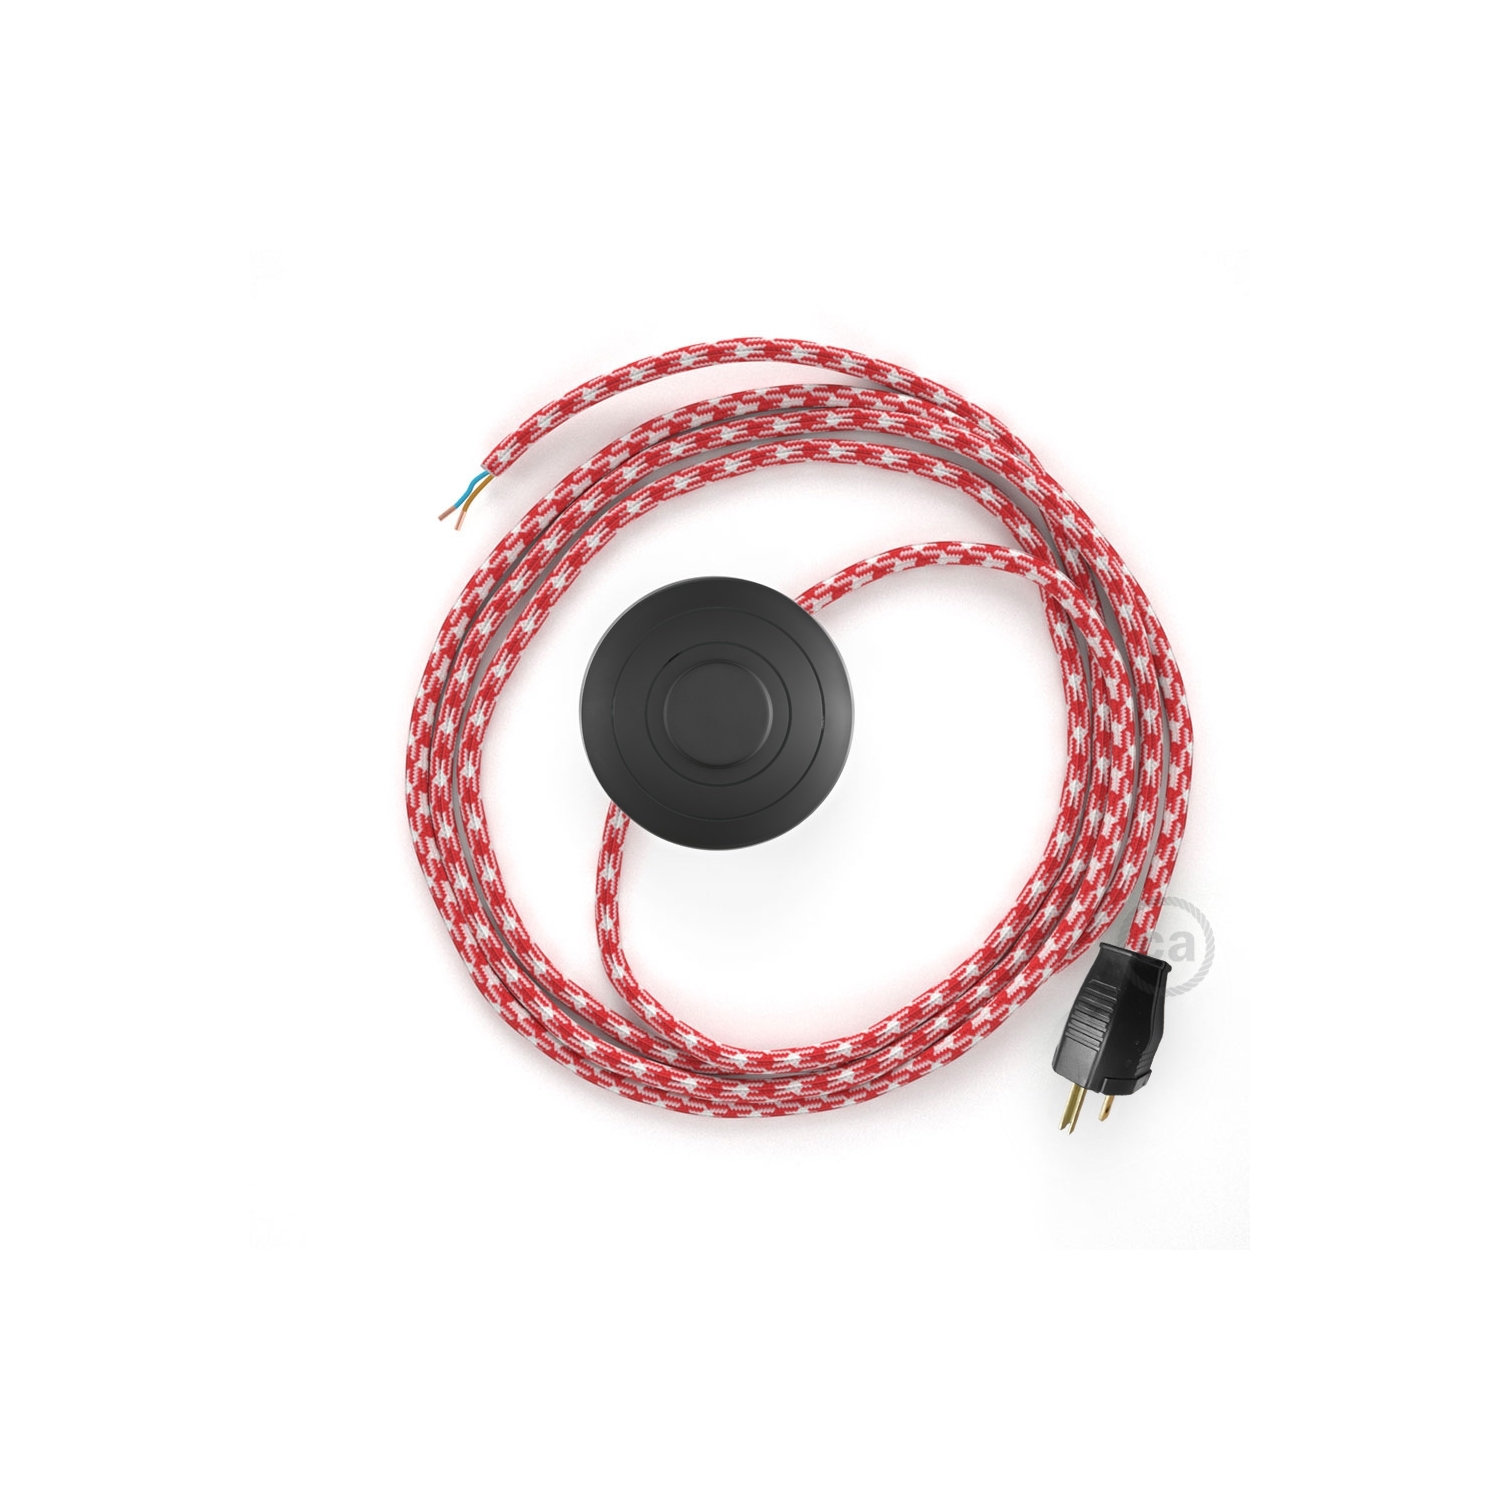 Power Cord with foot switch, RP09 Red & White Houndstooth - Choose color of switch/plug